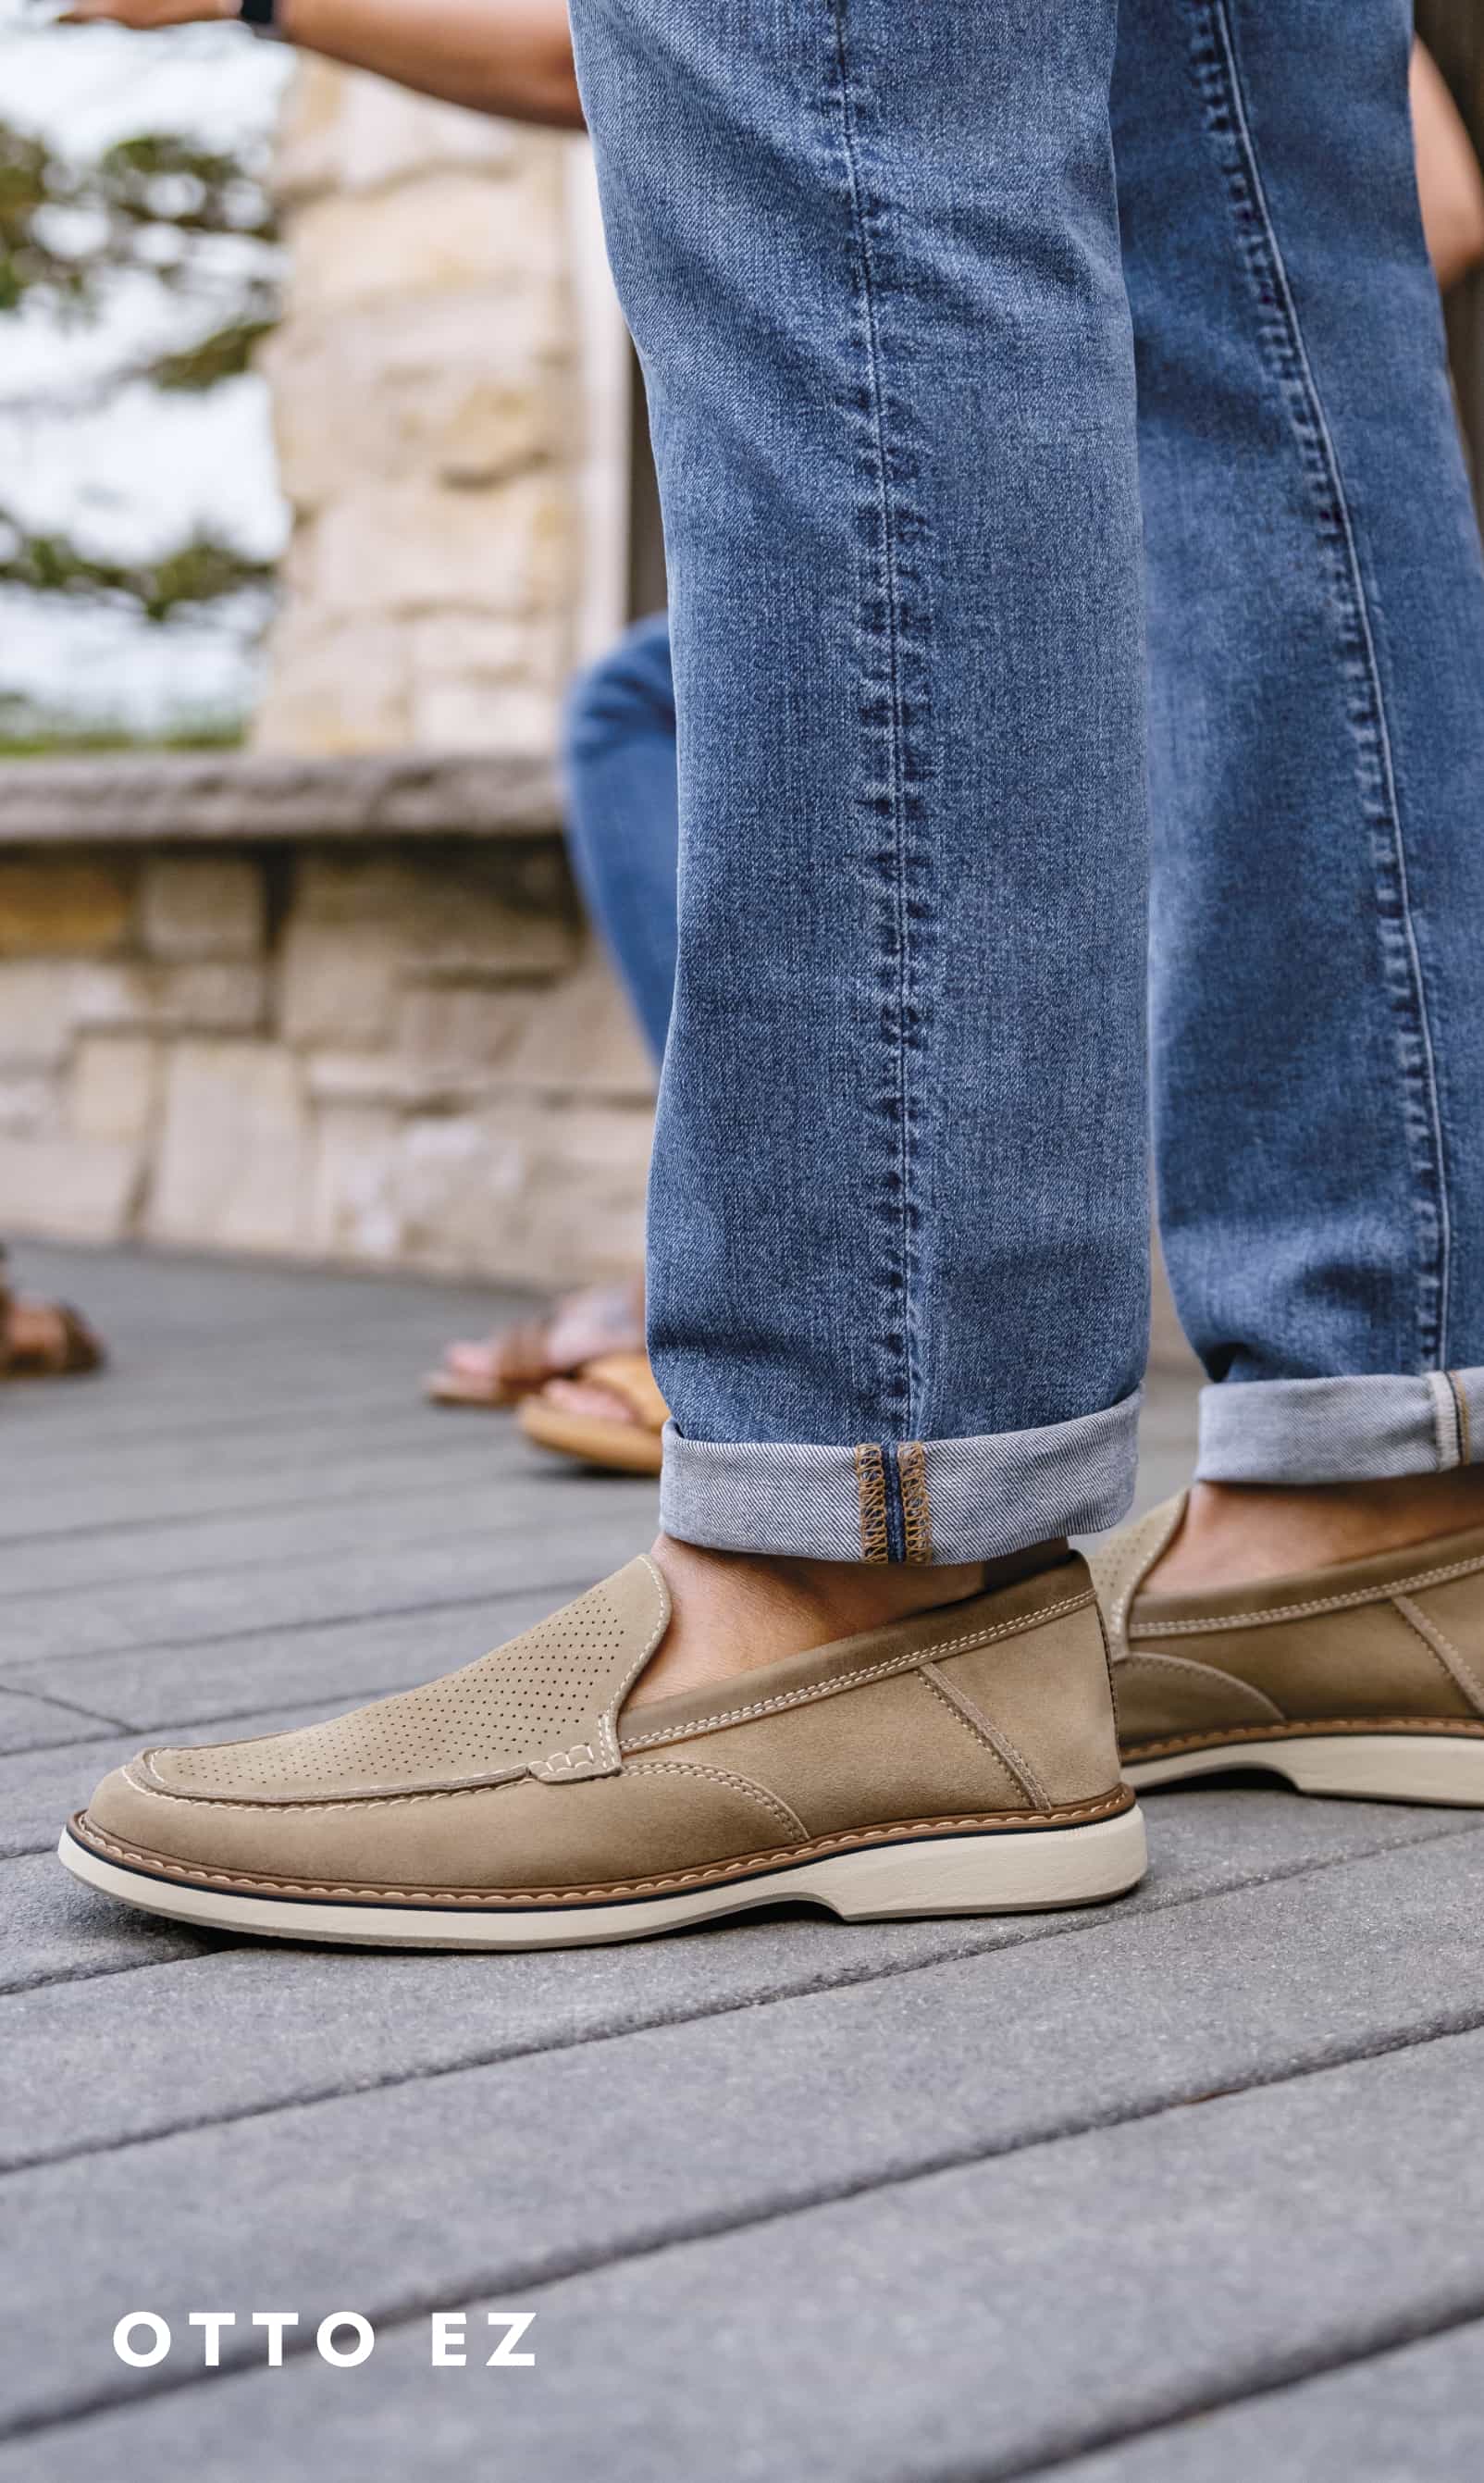 Men's Dress Shoes category. Image features the Otto EZ slip on in tan.